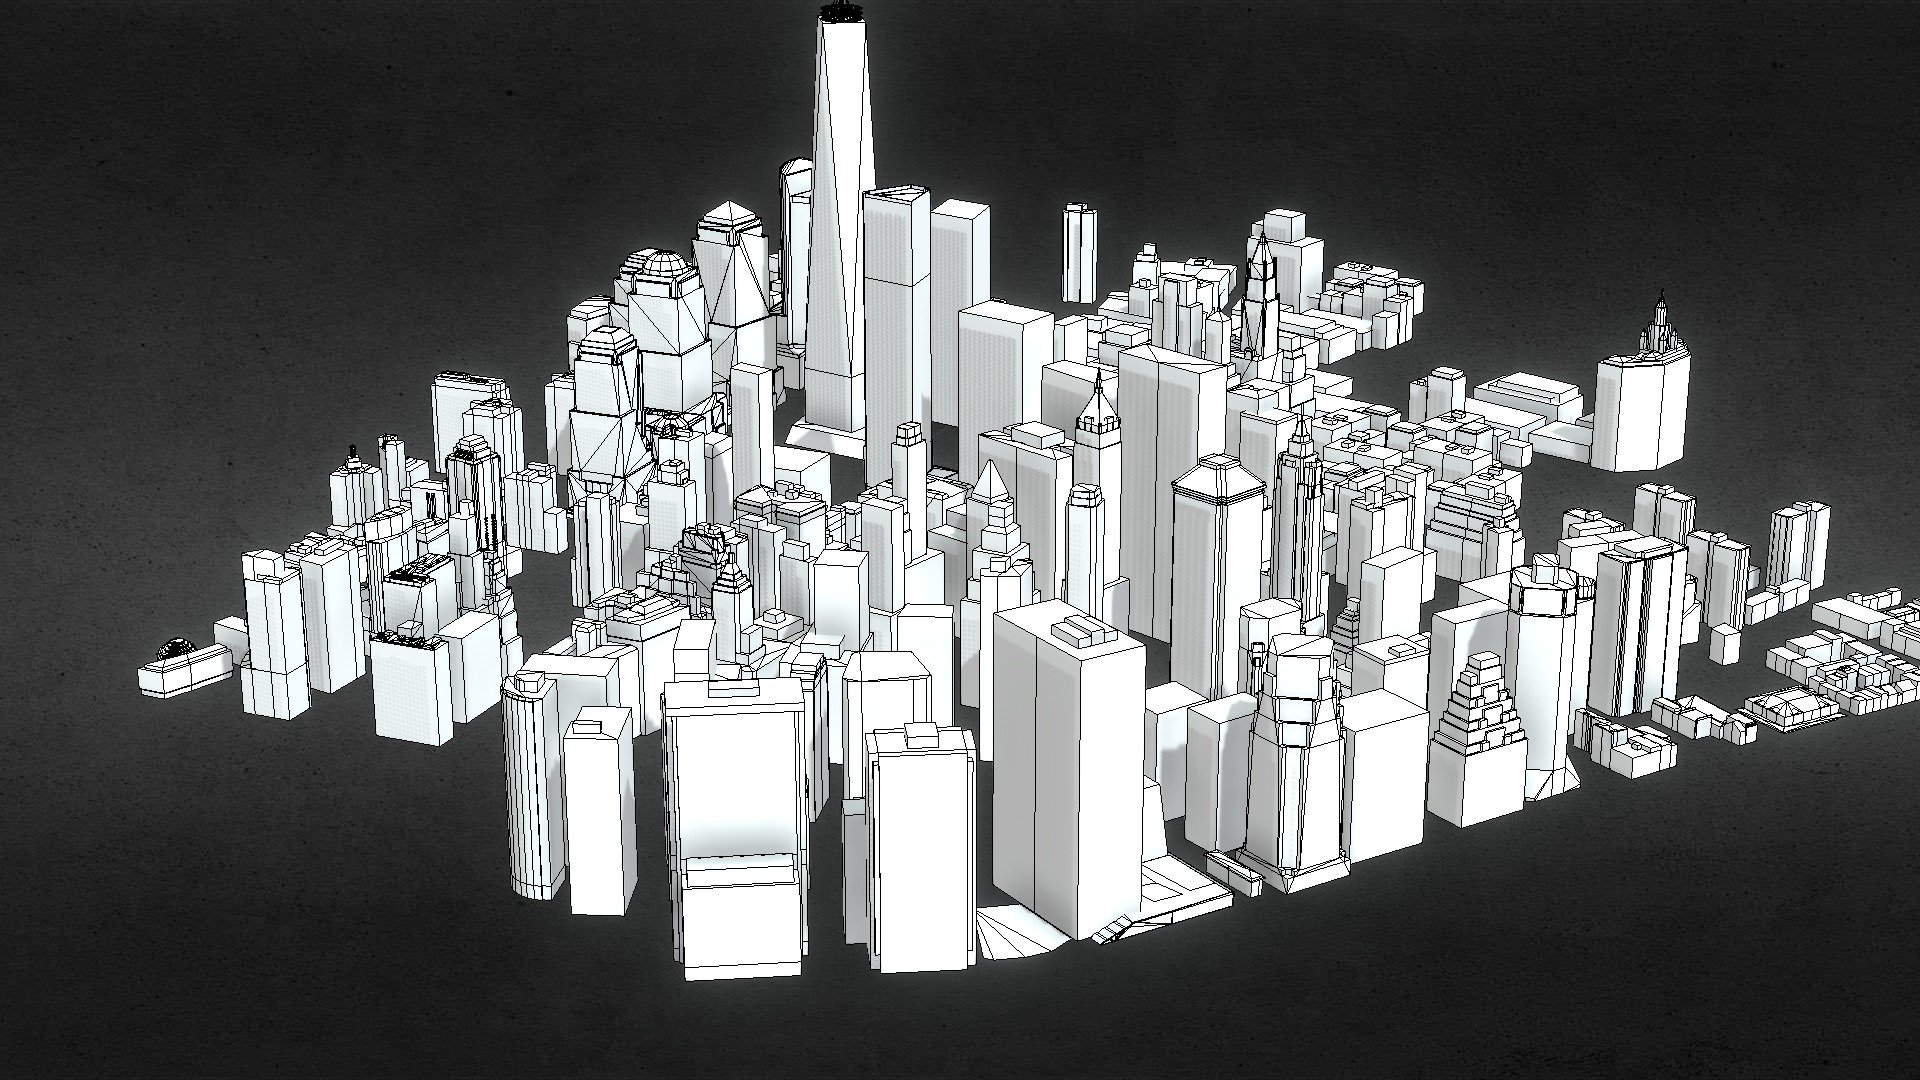 A visualisation of the lower Manhattan district, NYC - Lower Manhattan visualisation - 3D model by 99.Miles 3d model